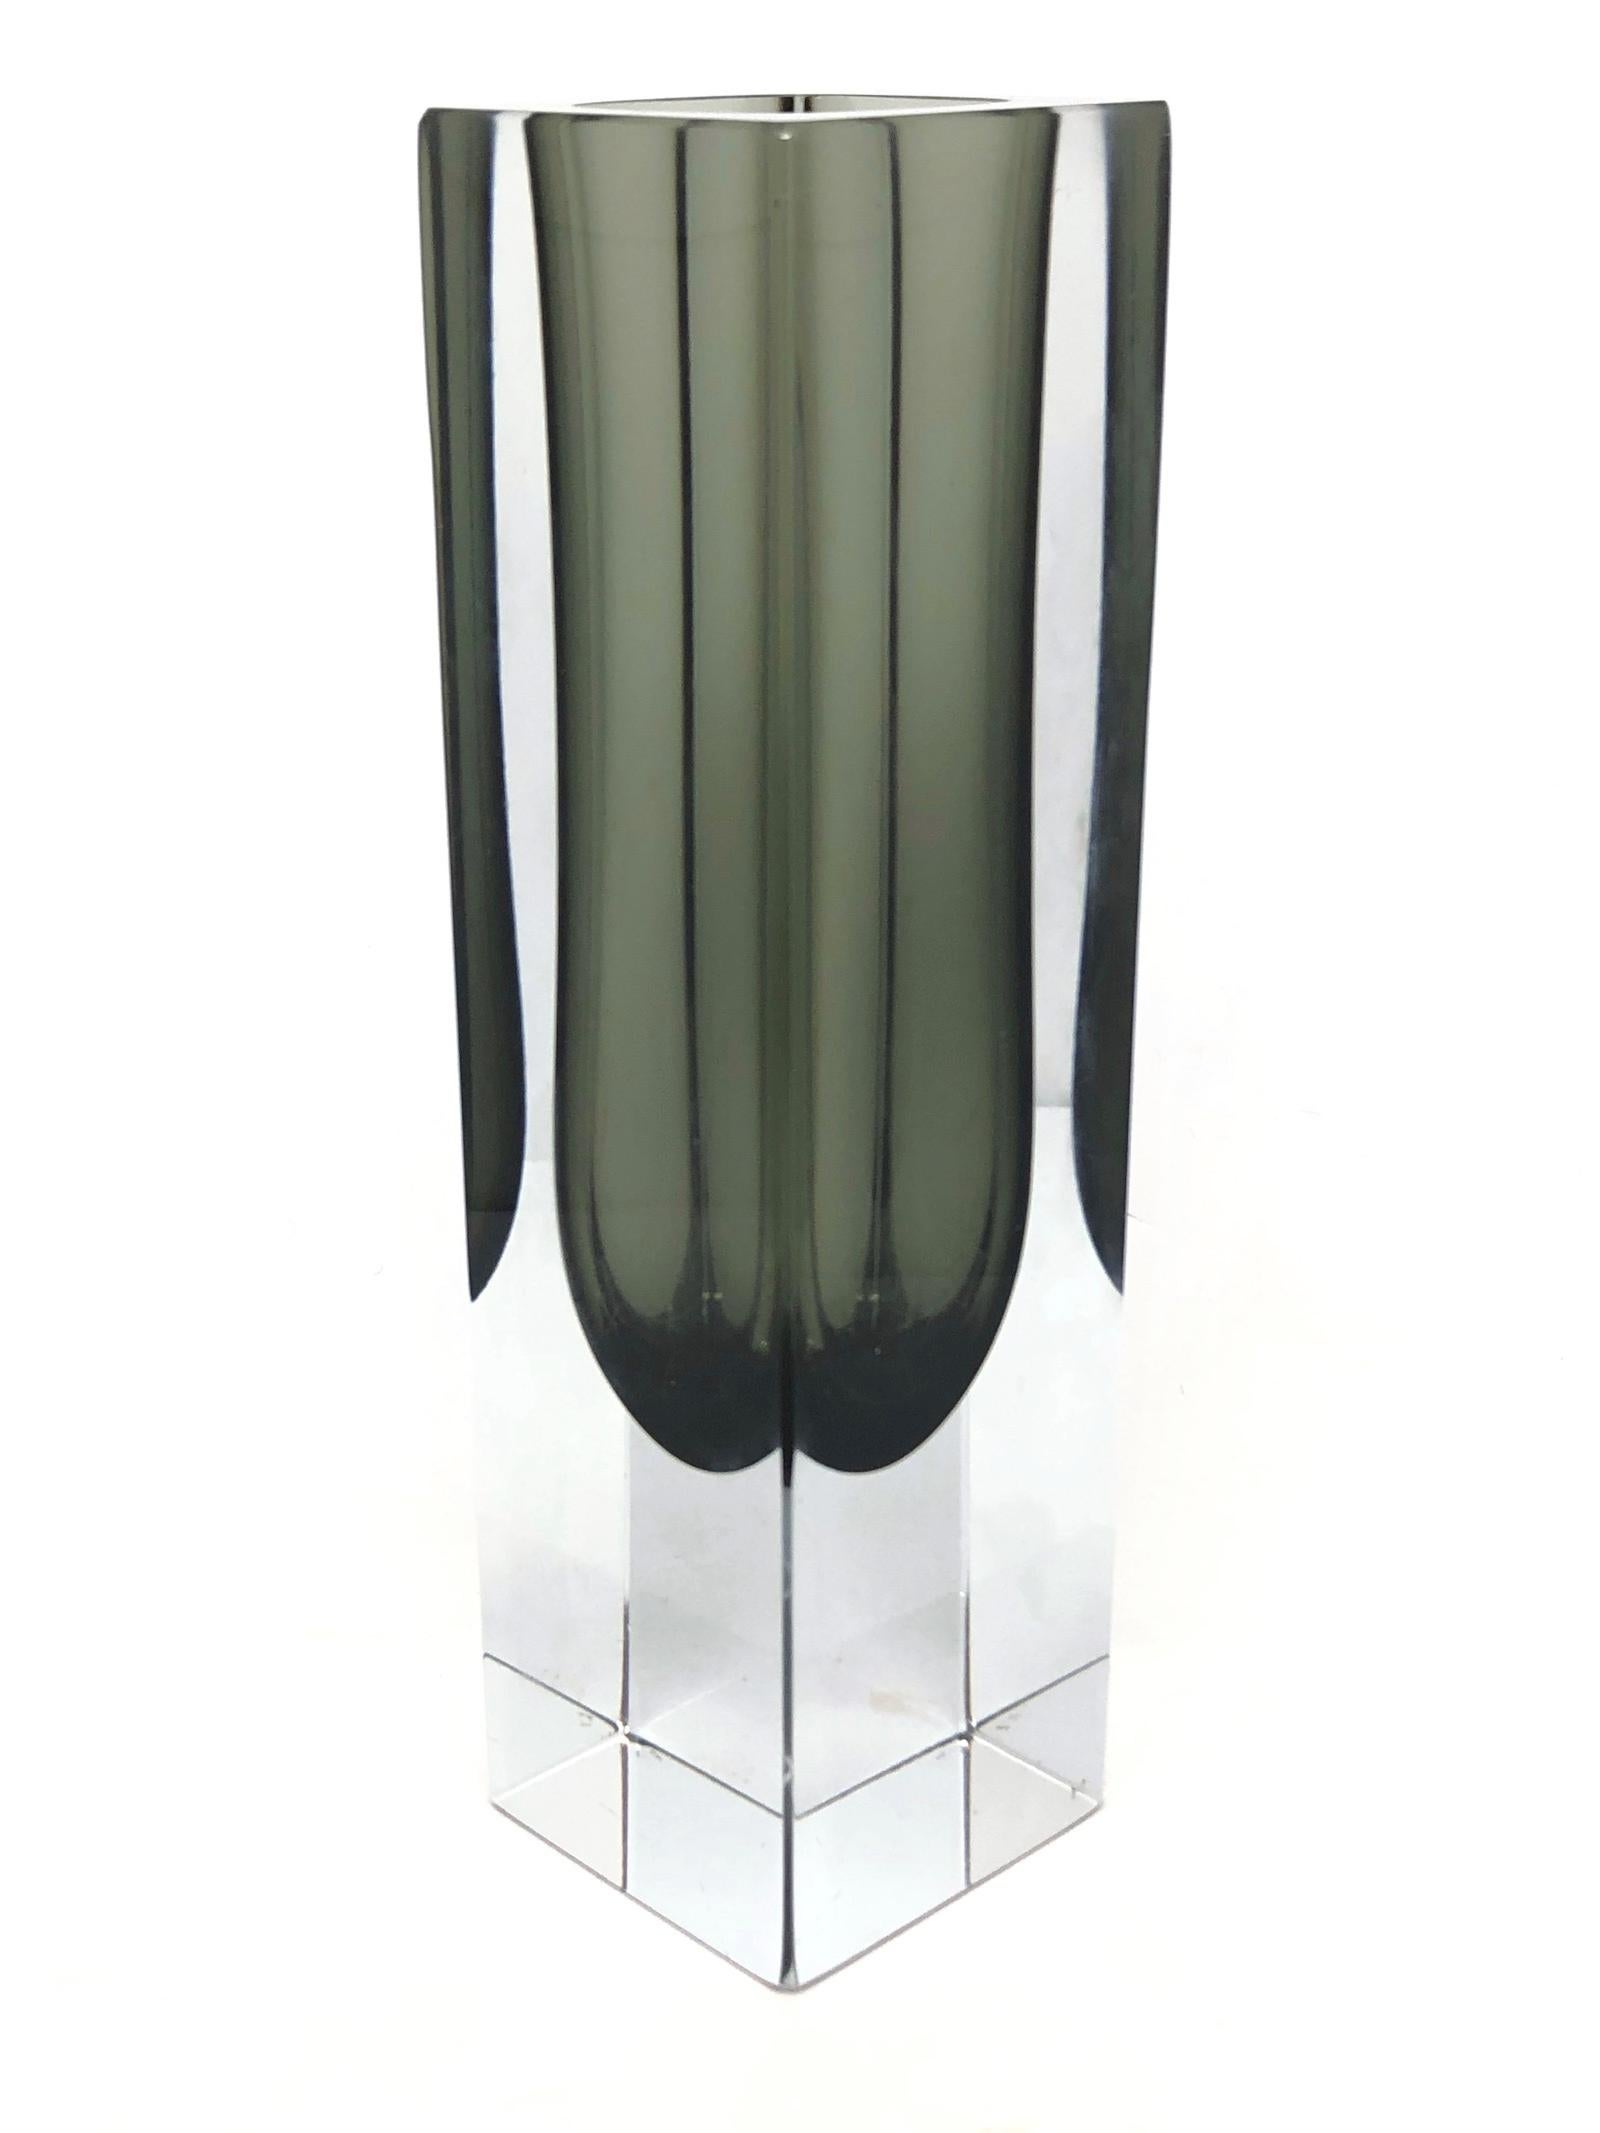 An amazing Venetian Murano glass Mid-Century Modern Mandruzzato vase made in Italy, circa 1960s. This is a heavy glass block vase. Black or dark grey inside within clear. The top of the vase is flat cut. Vase is in very good condition.